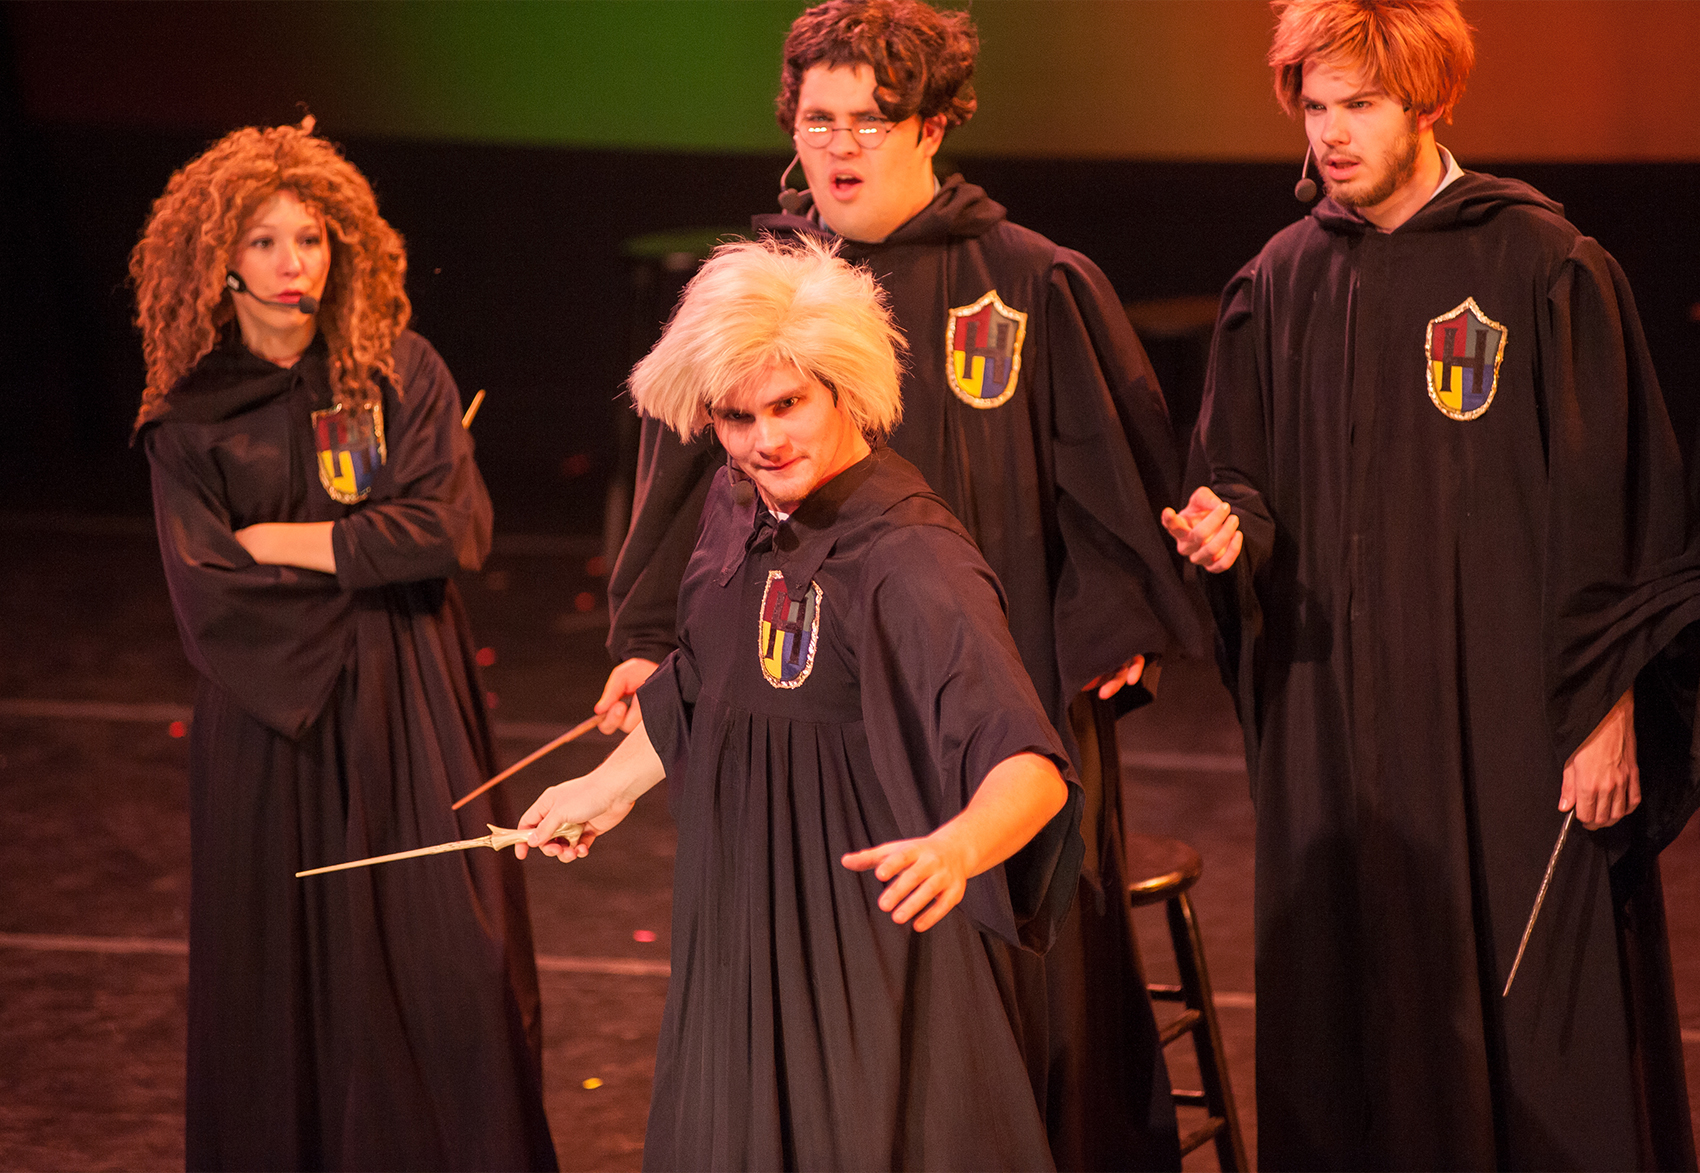 A group of actors dressed as characters from the Harry Potter series stand huddled around one actor who stands in the foreground. He has his wand in his right hand and looks mischievously at the audience. The actress behind him to the right dons a curly headed wig and has her arms crossed, looking at the central actor. Next to her in the center background is an actor with glasses and curly hair who looks confused, along with the actor on his left, a wand in his left hand. 